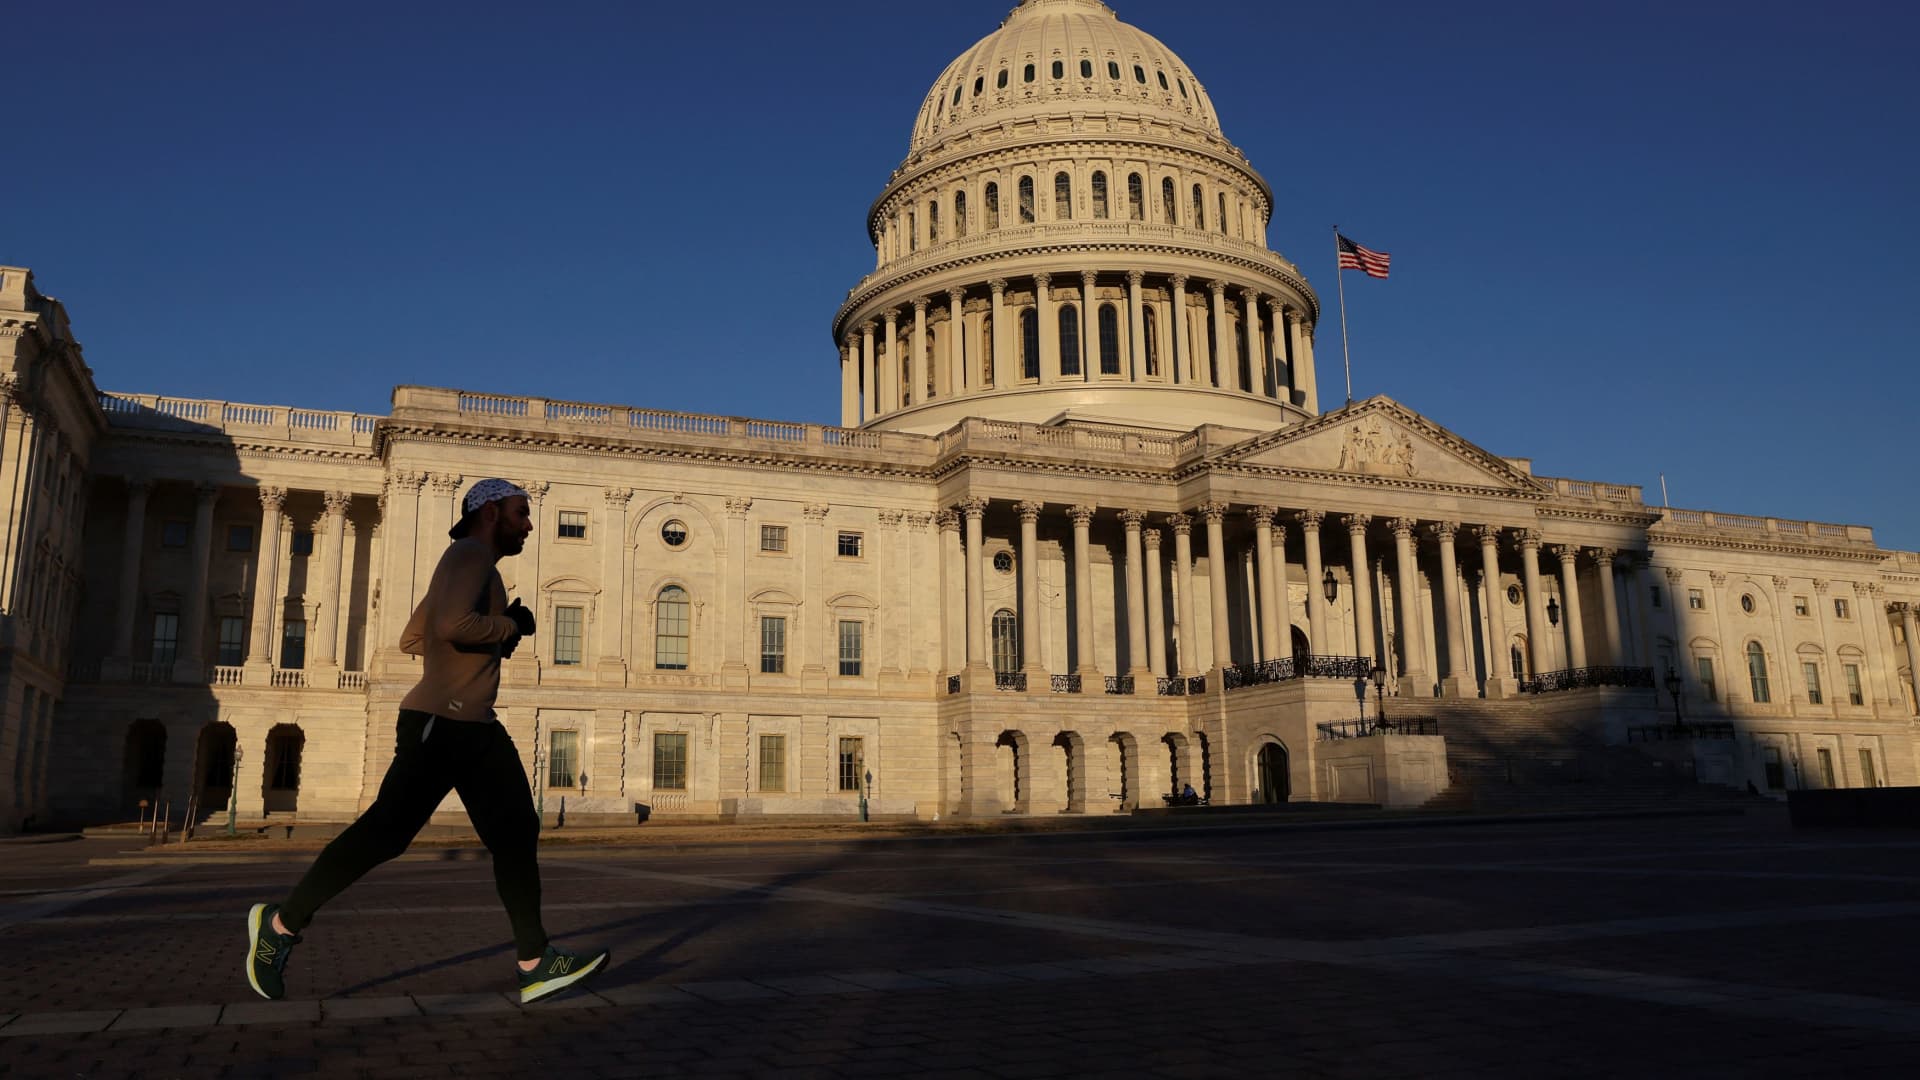 A man runs in front of the U.S. Capitol building during morning hours in Washington, U.S., February 10, 2022.